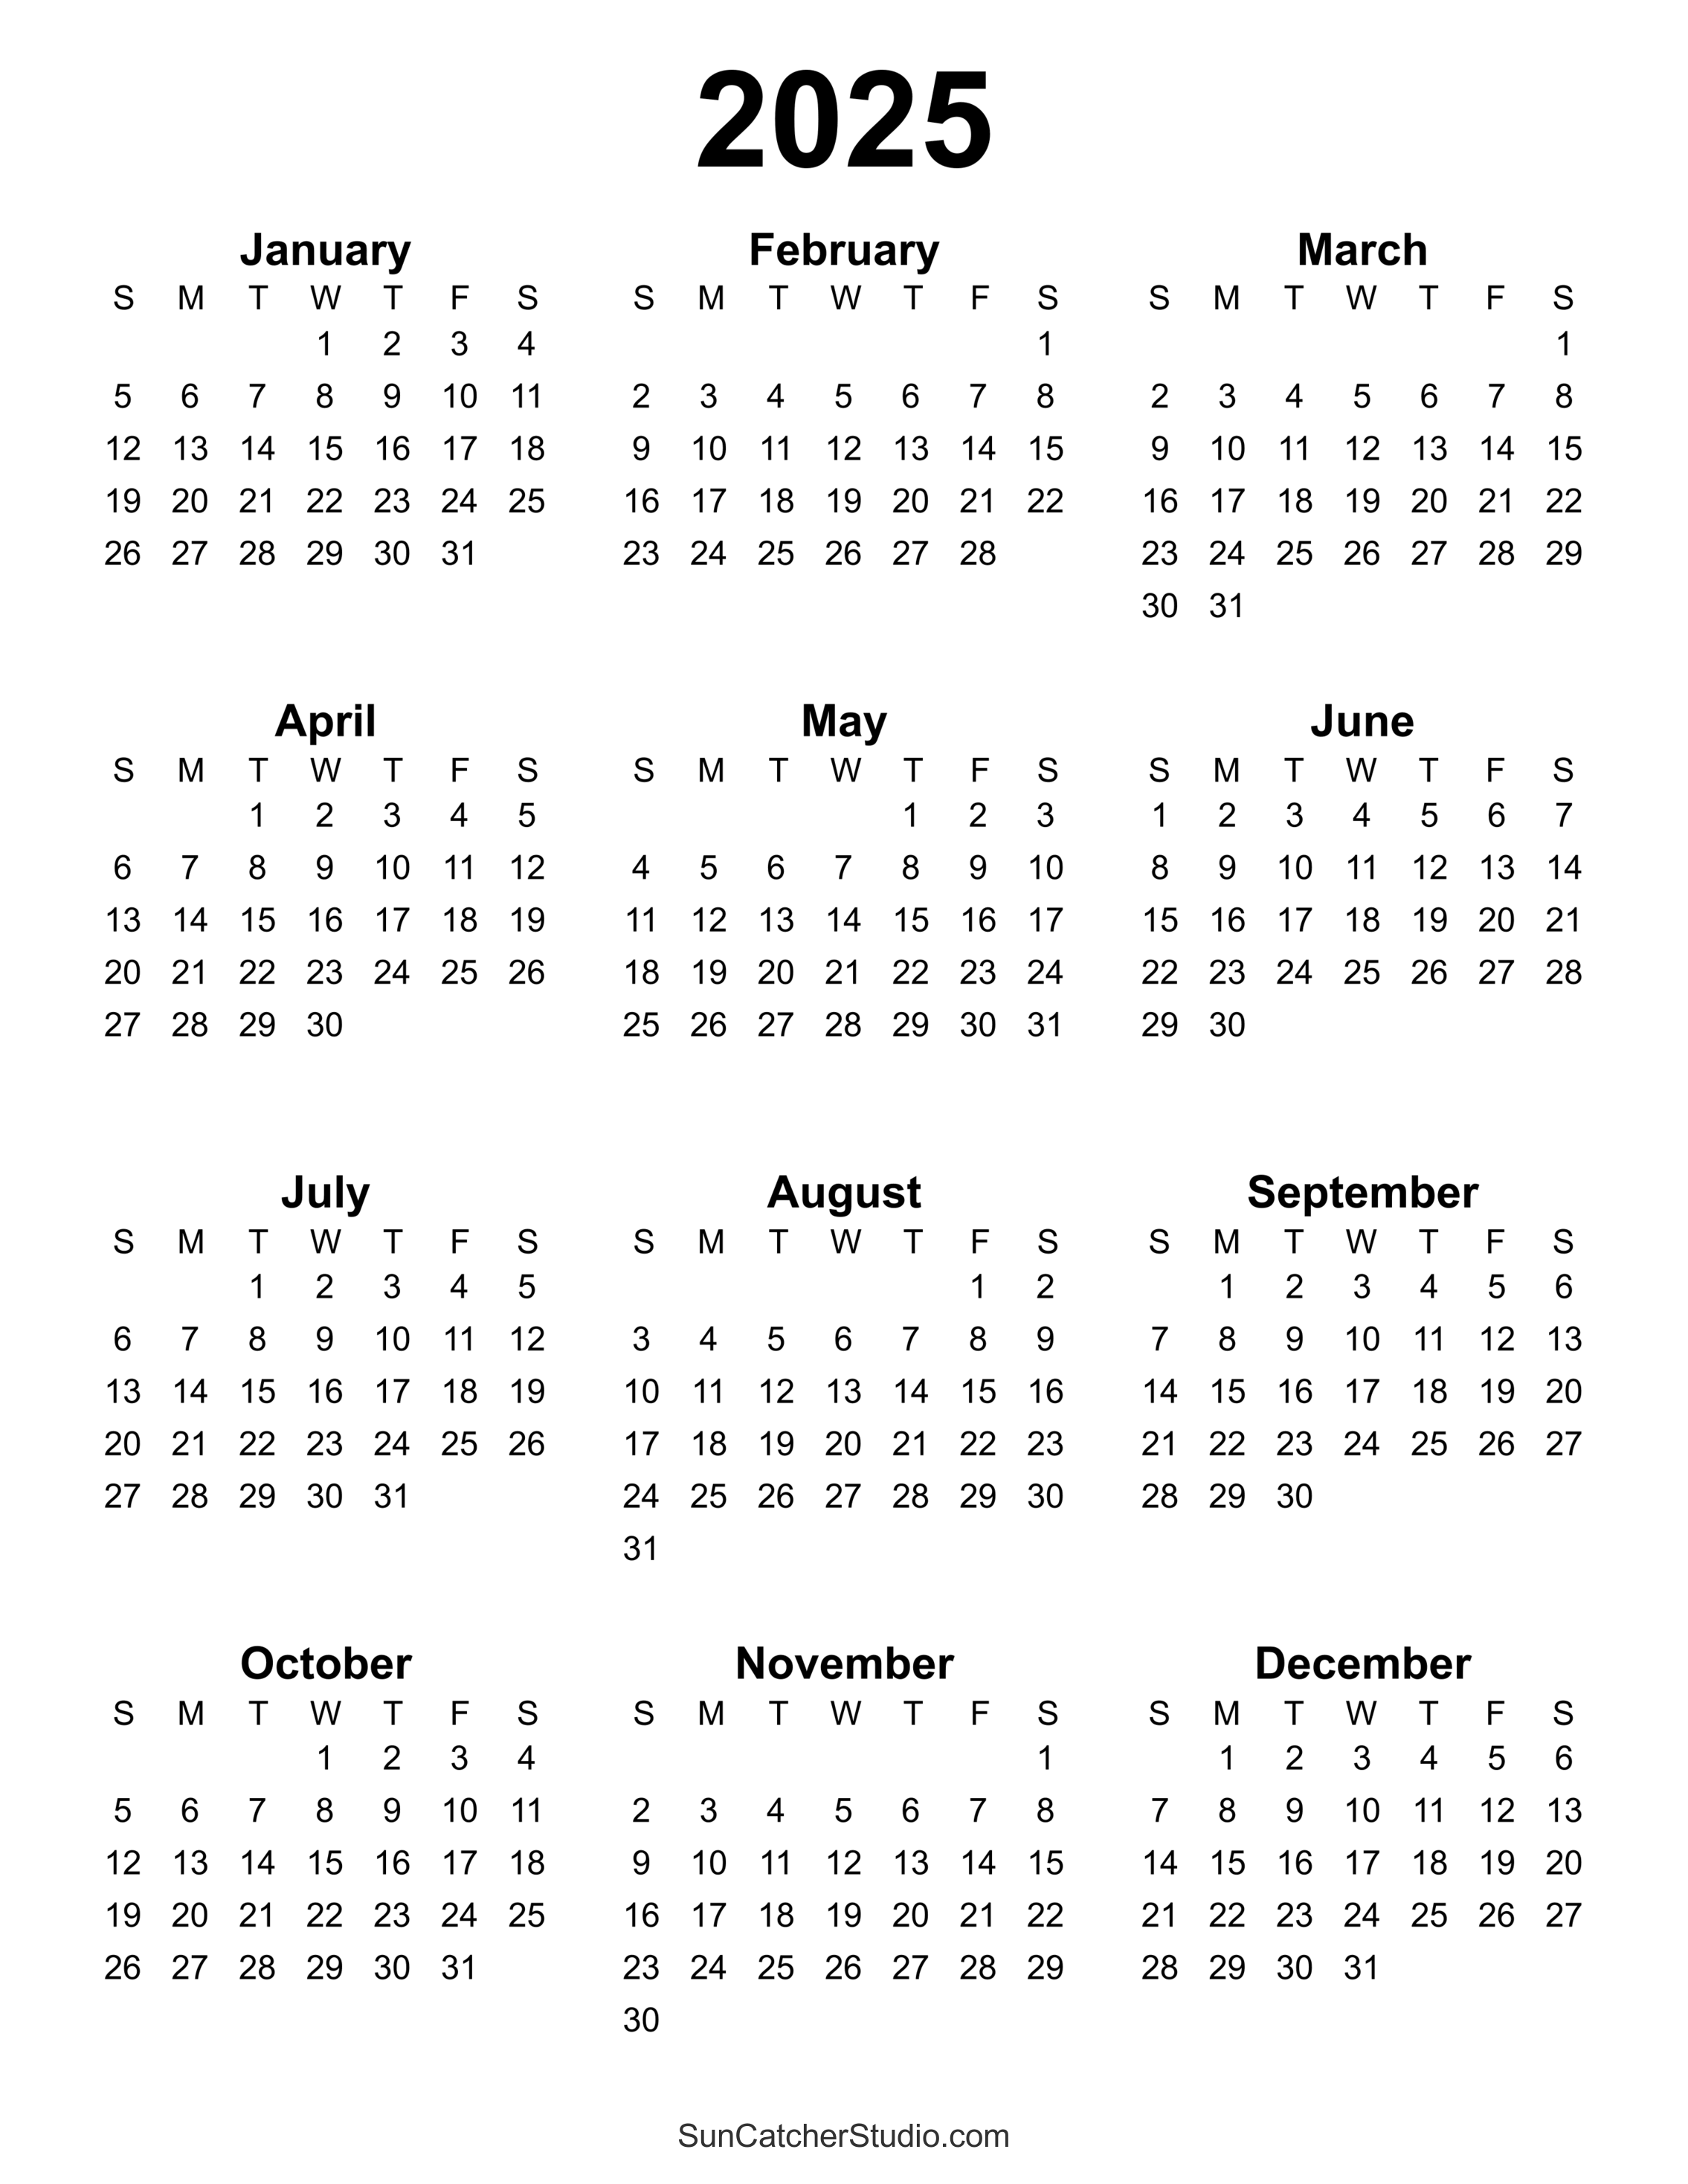 Free Printable 2025 Yearly Calendar – DIY Projects, Patterns, Monograms ...